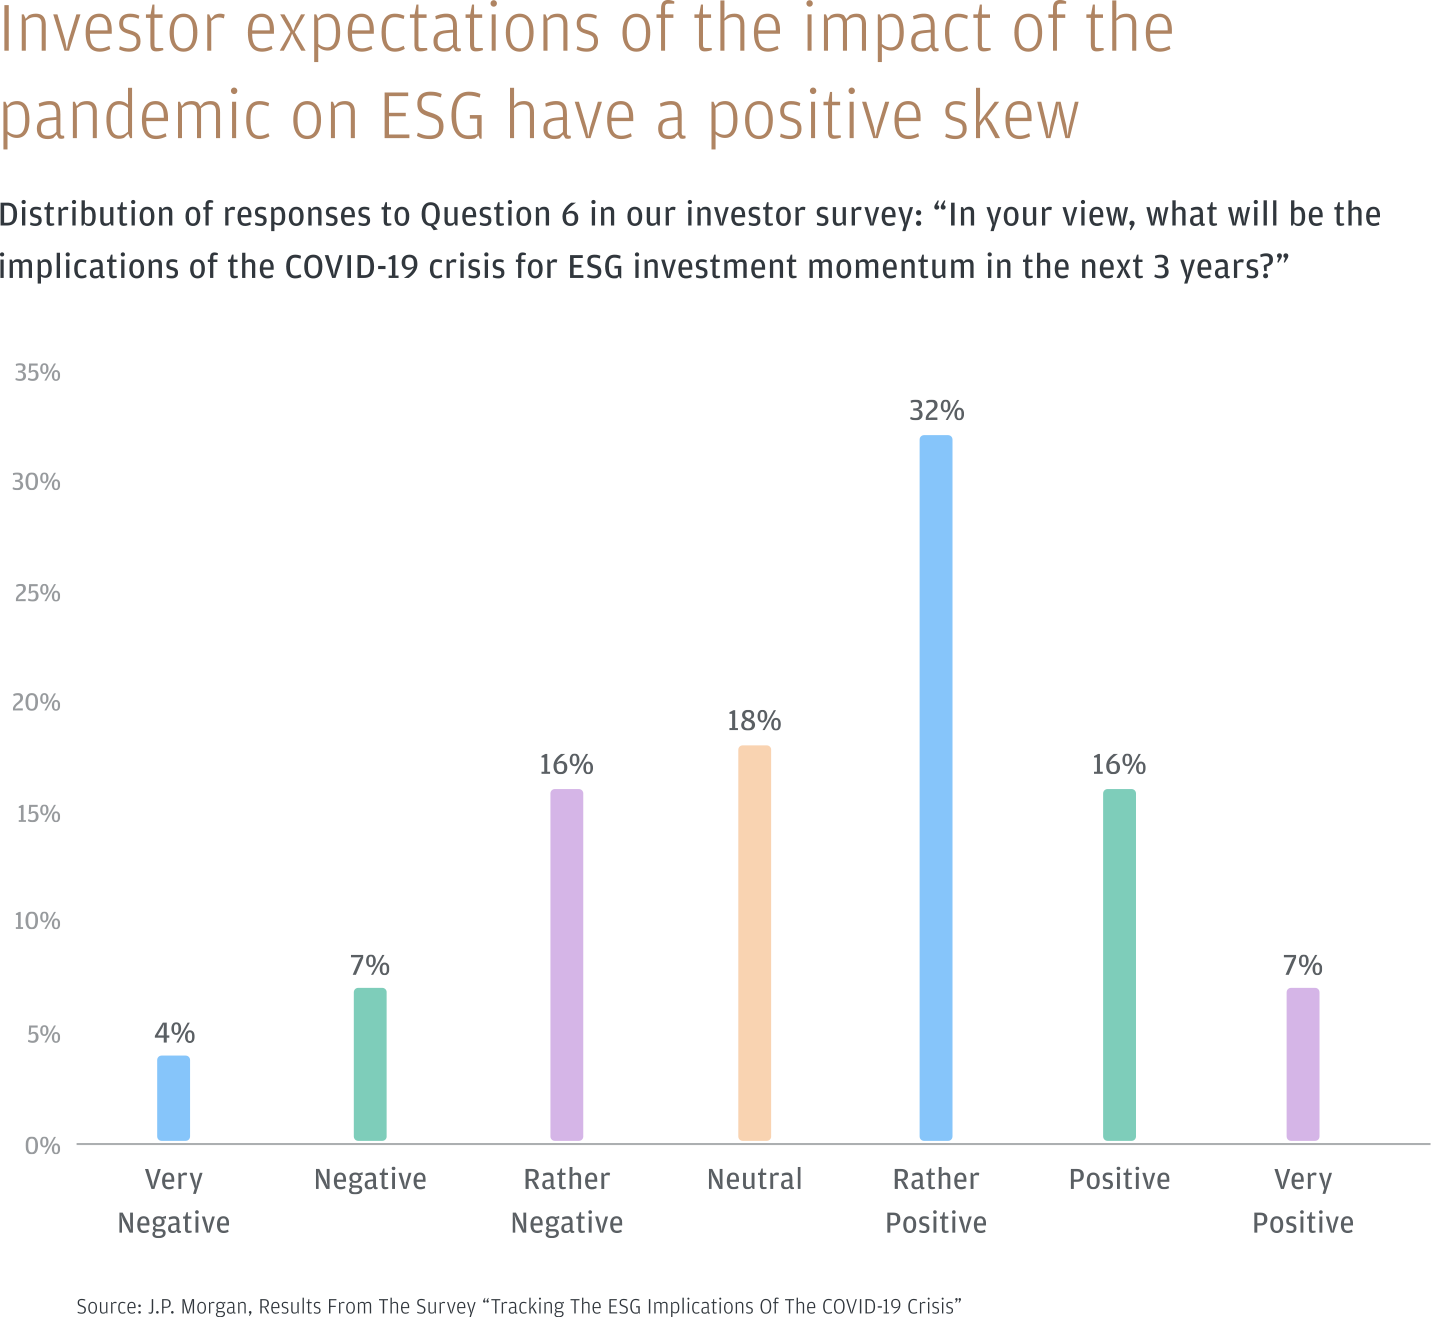 Infographic describes investor expectations of the pandemic on ESG